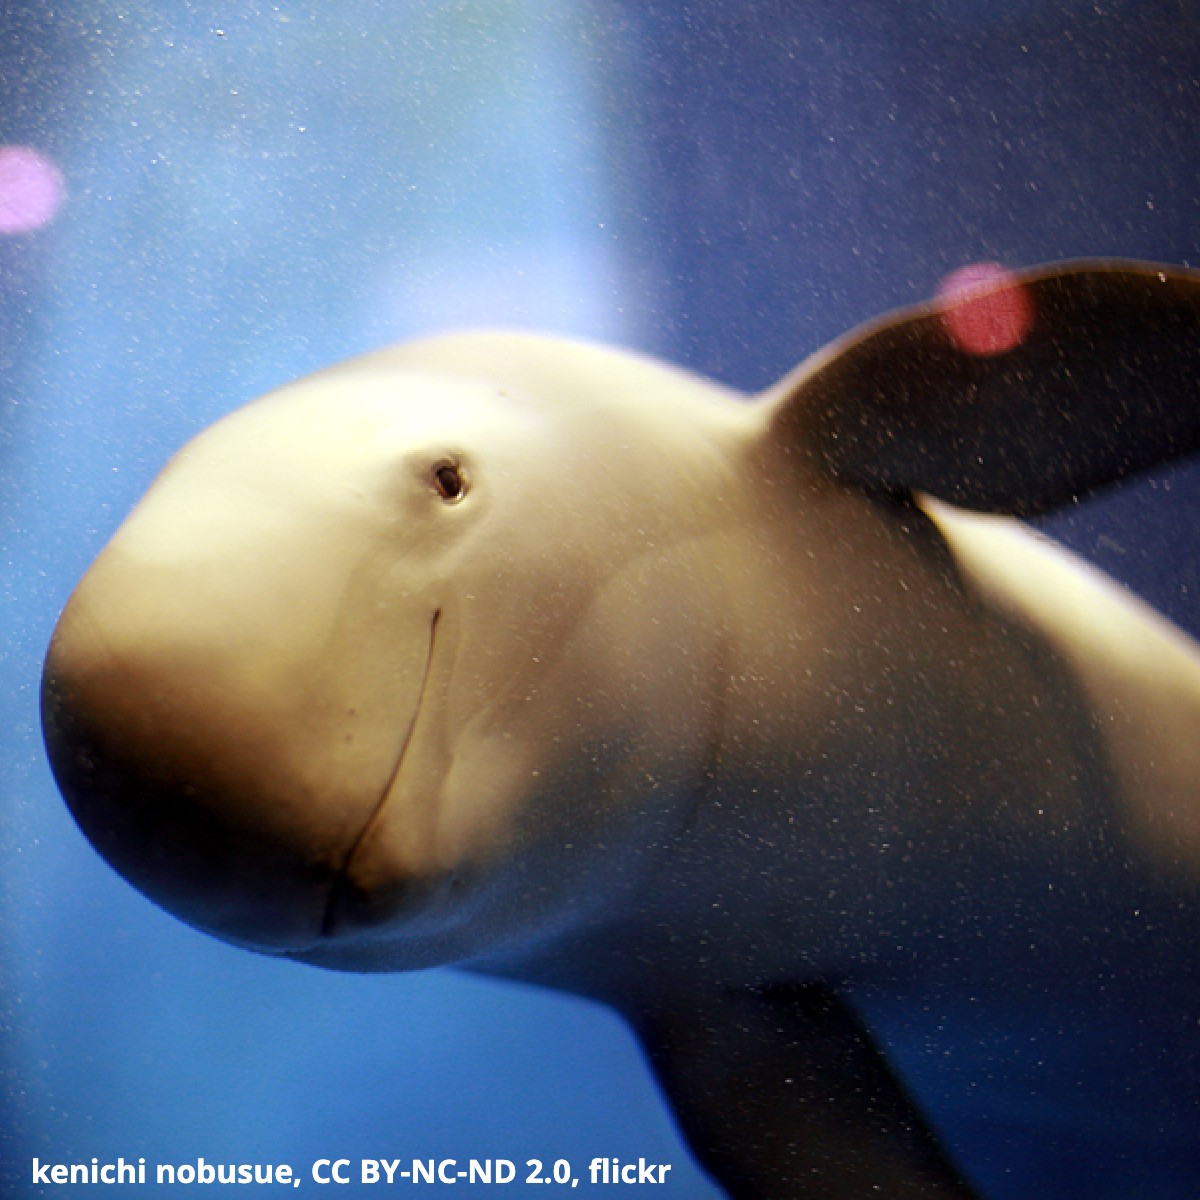 Name that cetacean! Found in waters off the coasts of Southeast Asia, this marine mammal inhabits both fresh and saltwater. It dines on squid, crustaceans, & small fishes. True to its name, it has no dorsal fin. Have you guessed it yet? It’s the Indo-Pacific finless porpoise!